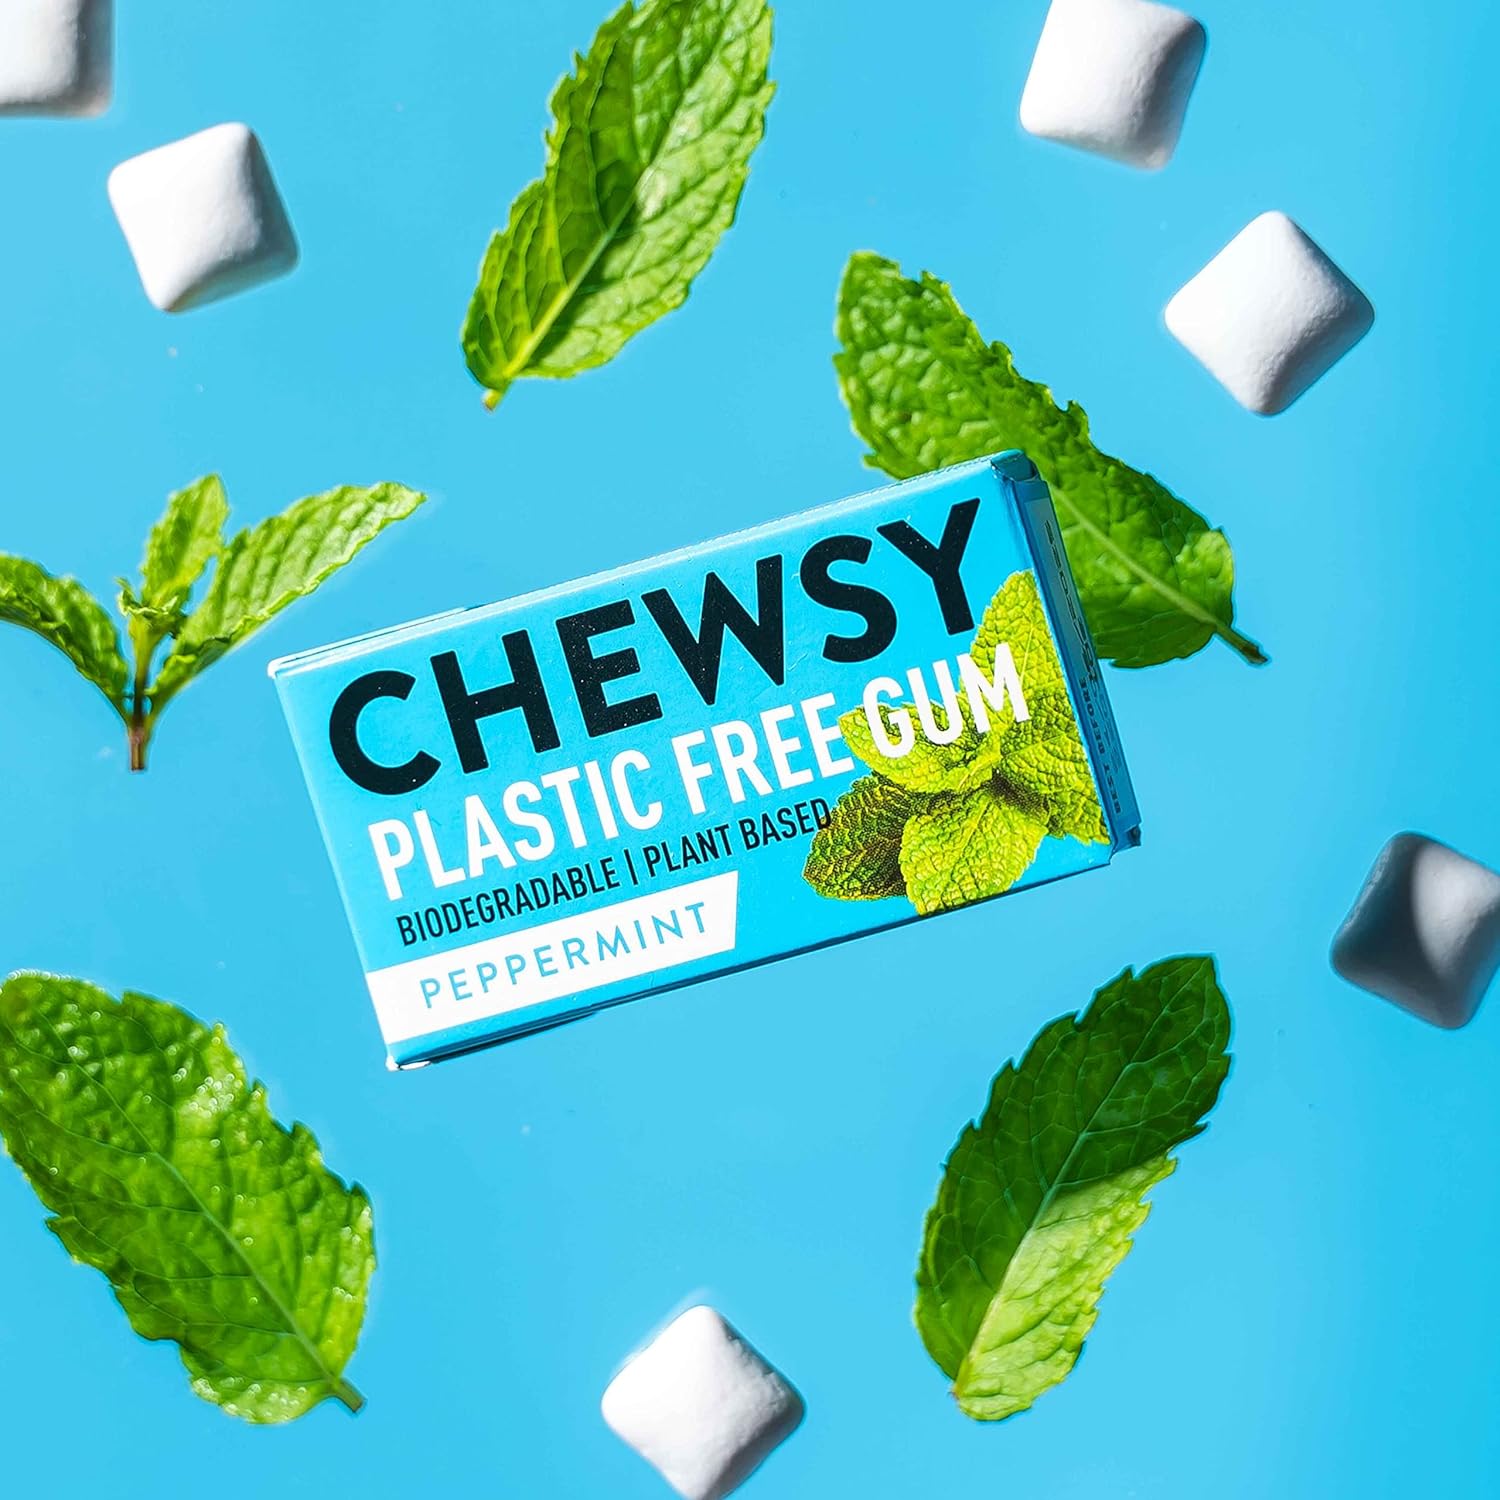 Peppermint Plant-based Plastic-free Gums 15g